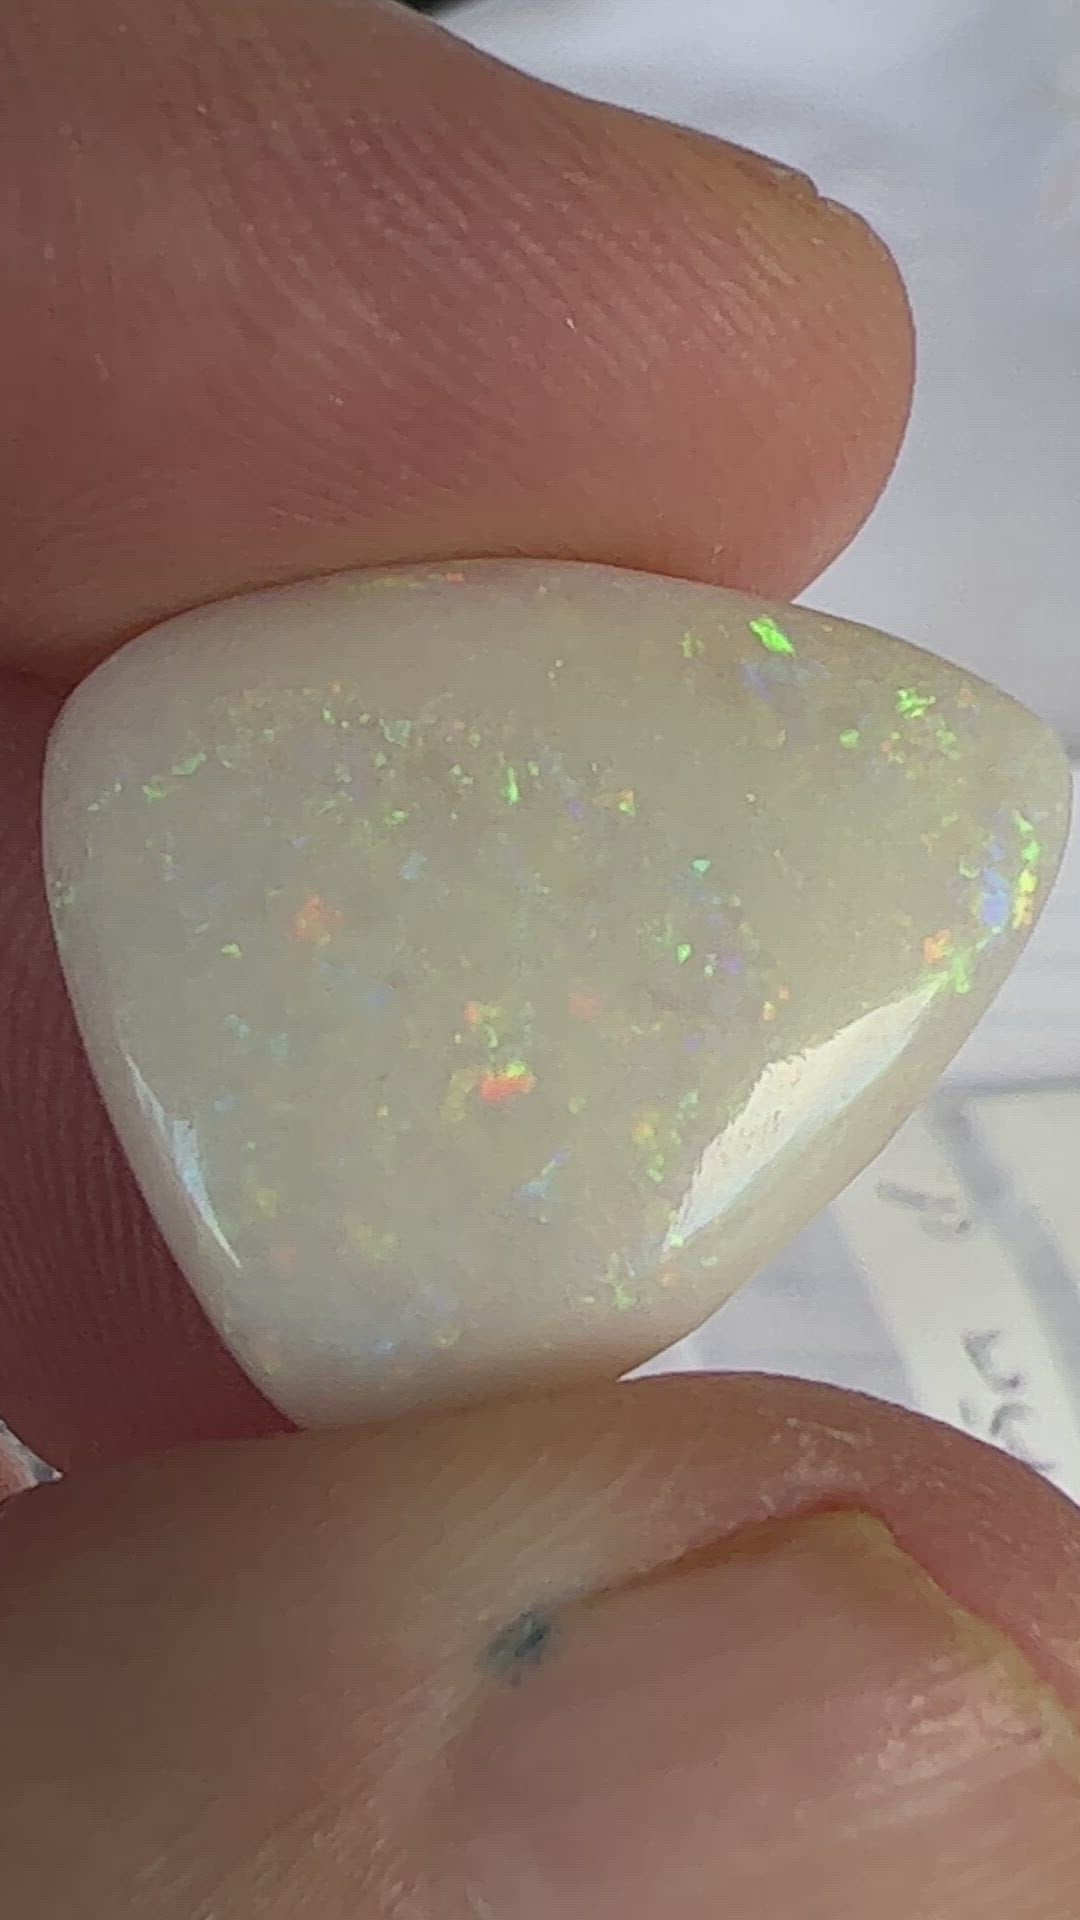 Coober Pedy solid white opal with Pin Fire colours. Quite large, and polished well, ready to make a pendant.